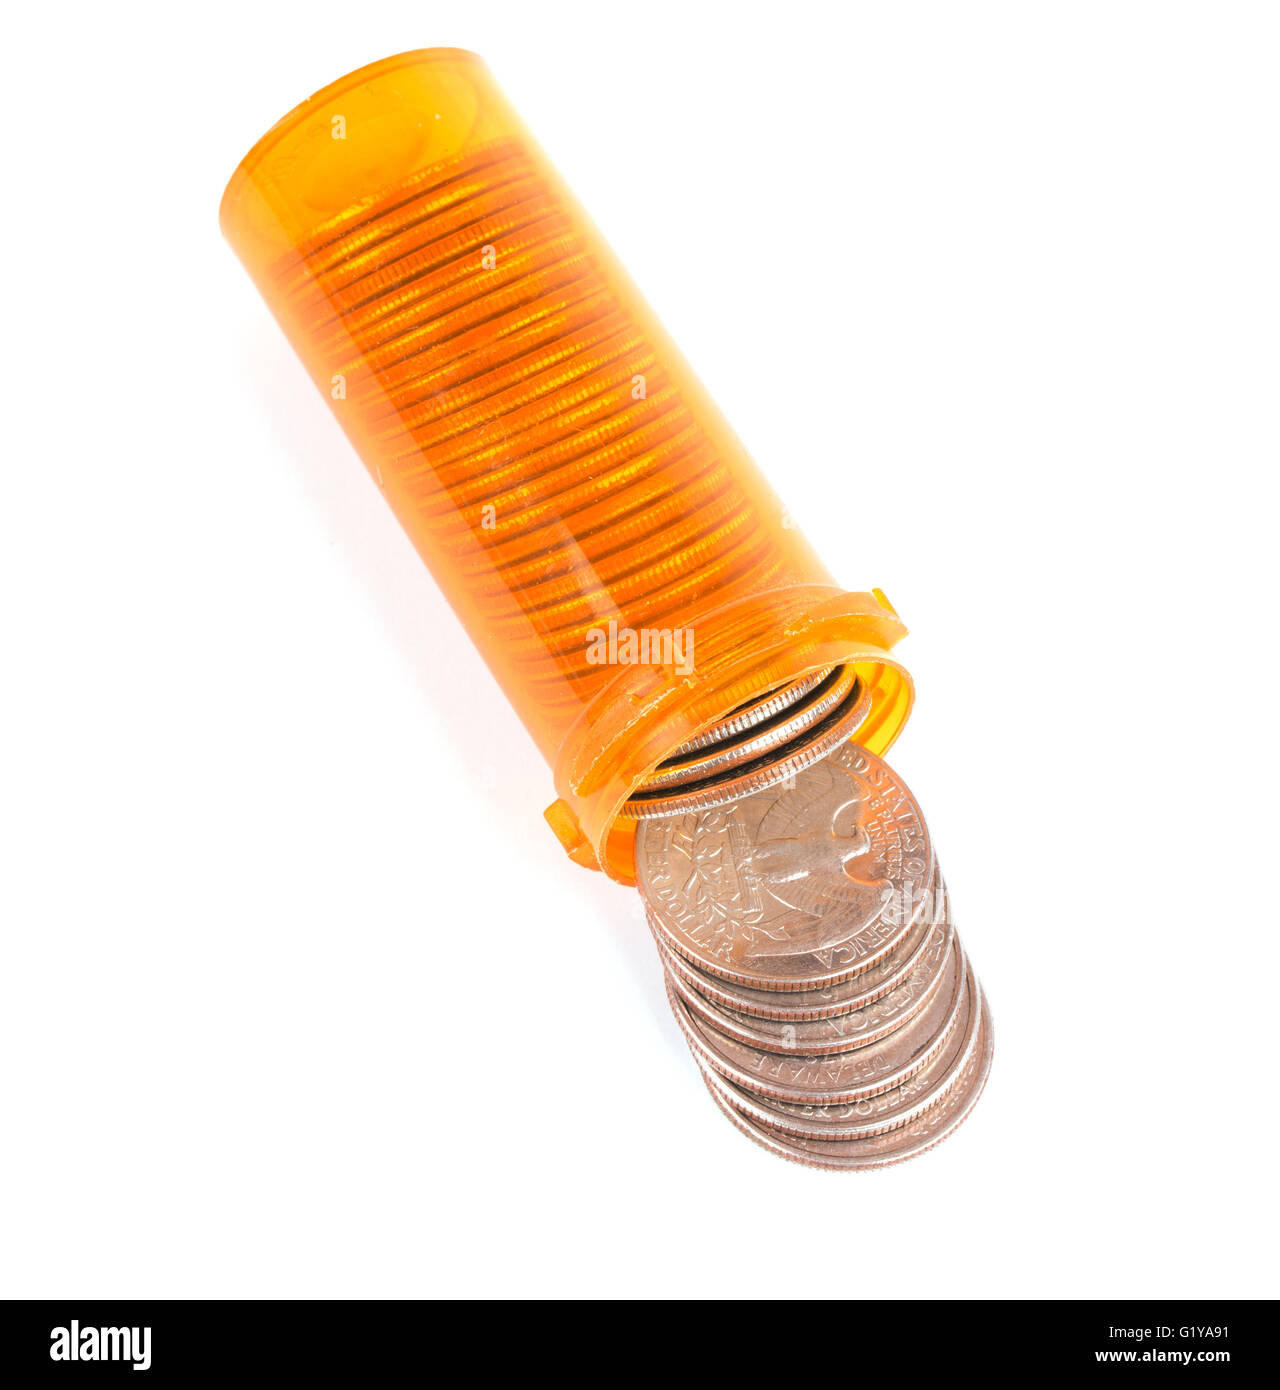 Orange medicine bottle with money pouring out - concept of expensive medical care - on white Stock Photo